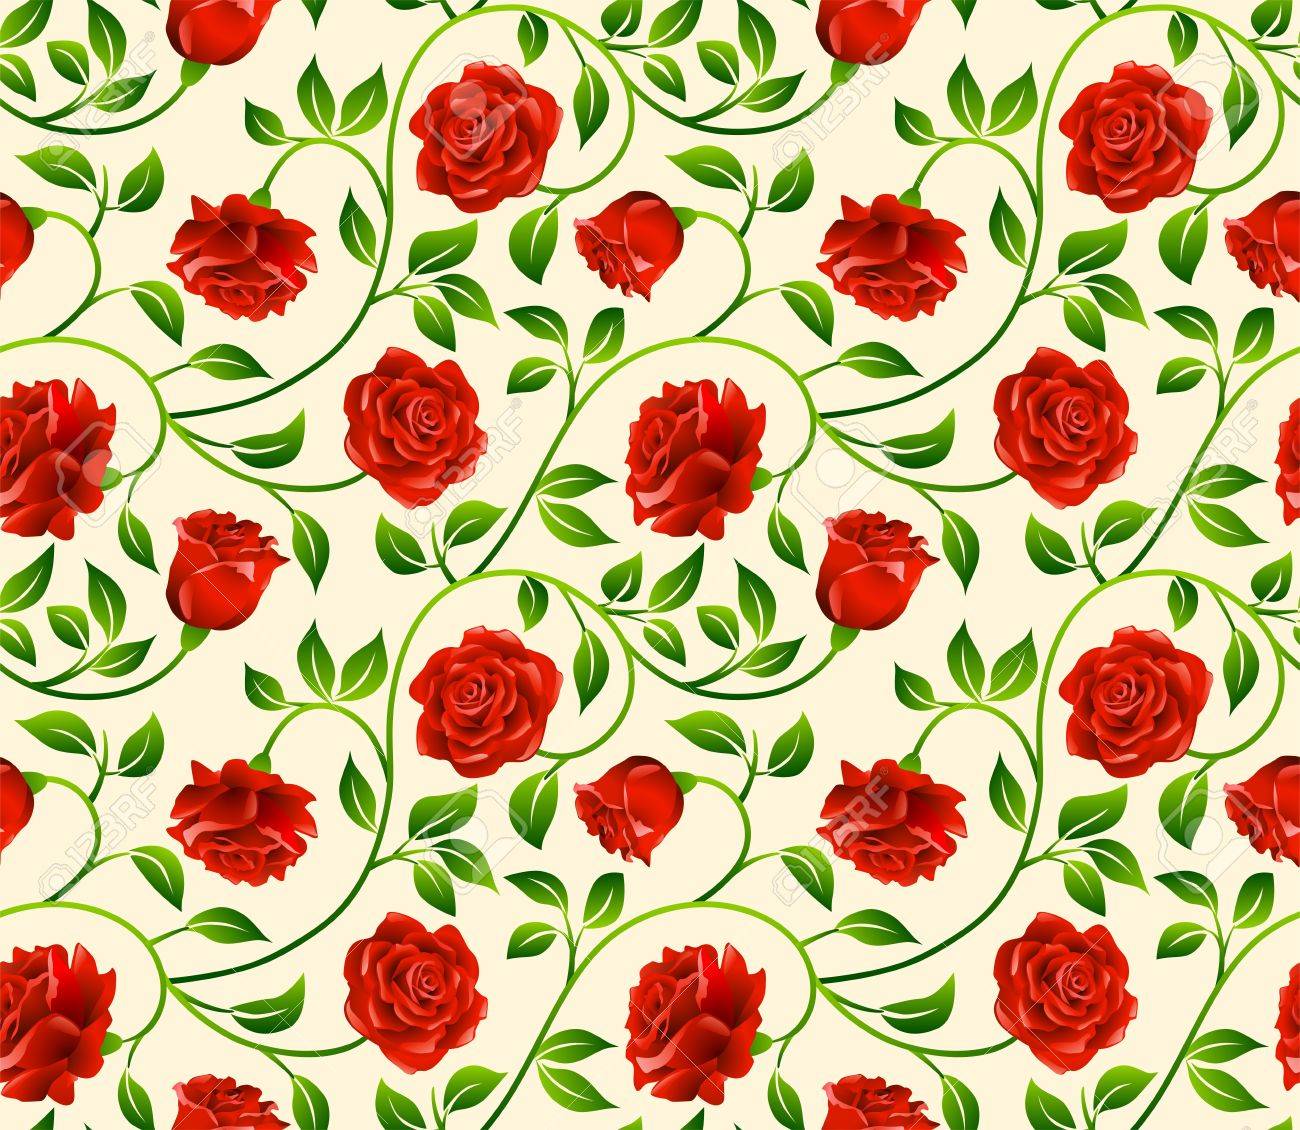 Roses Seamless Background Pattern For Continuous Replicate